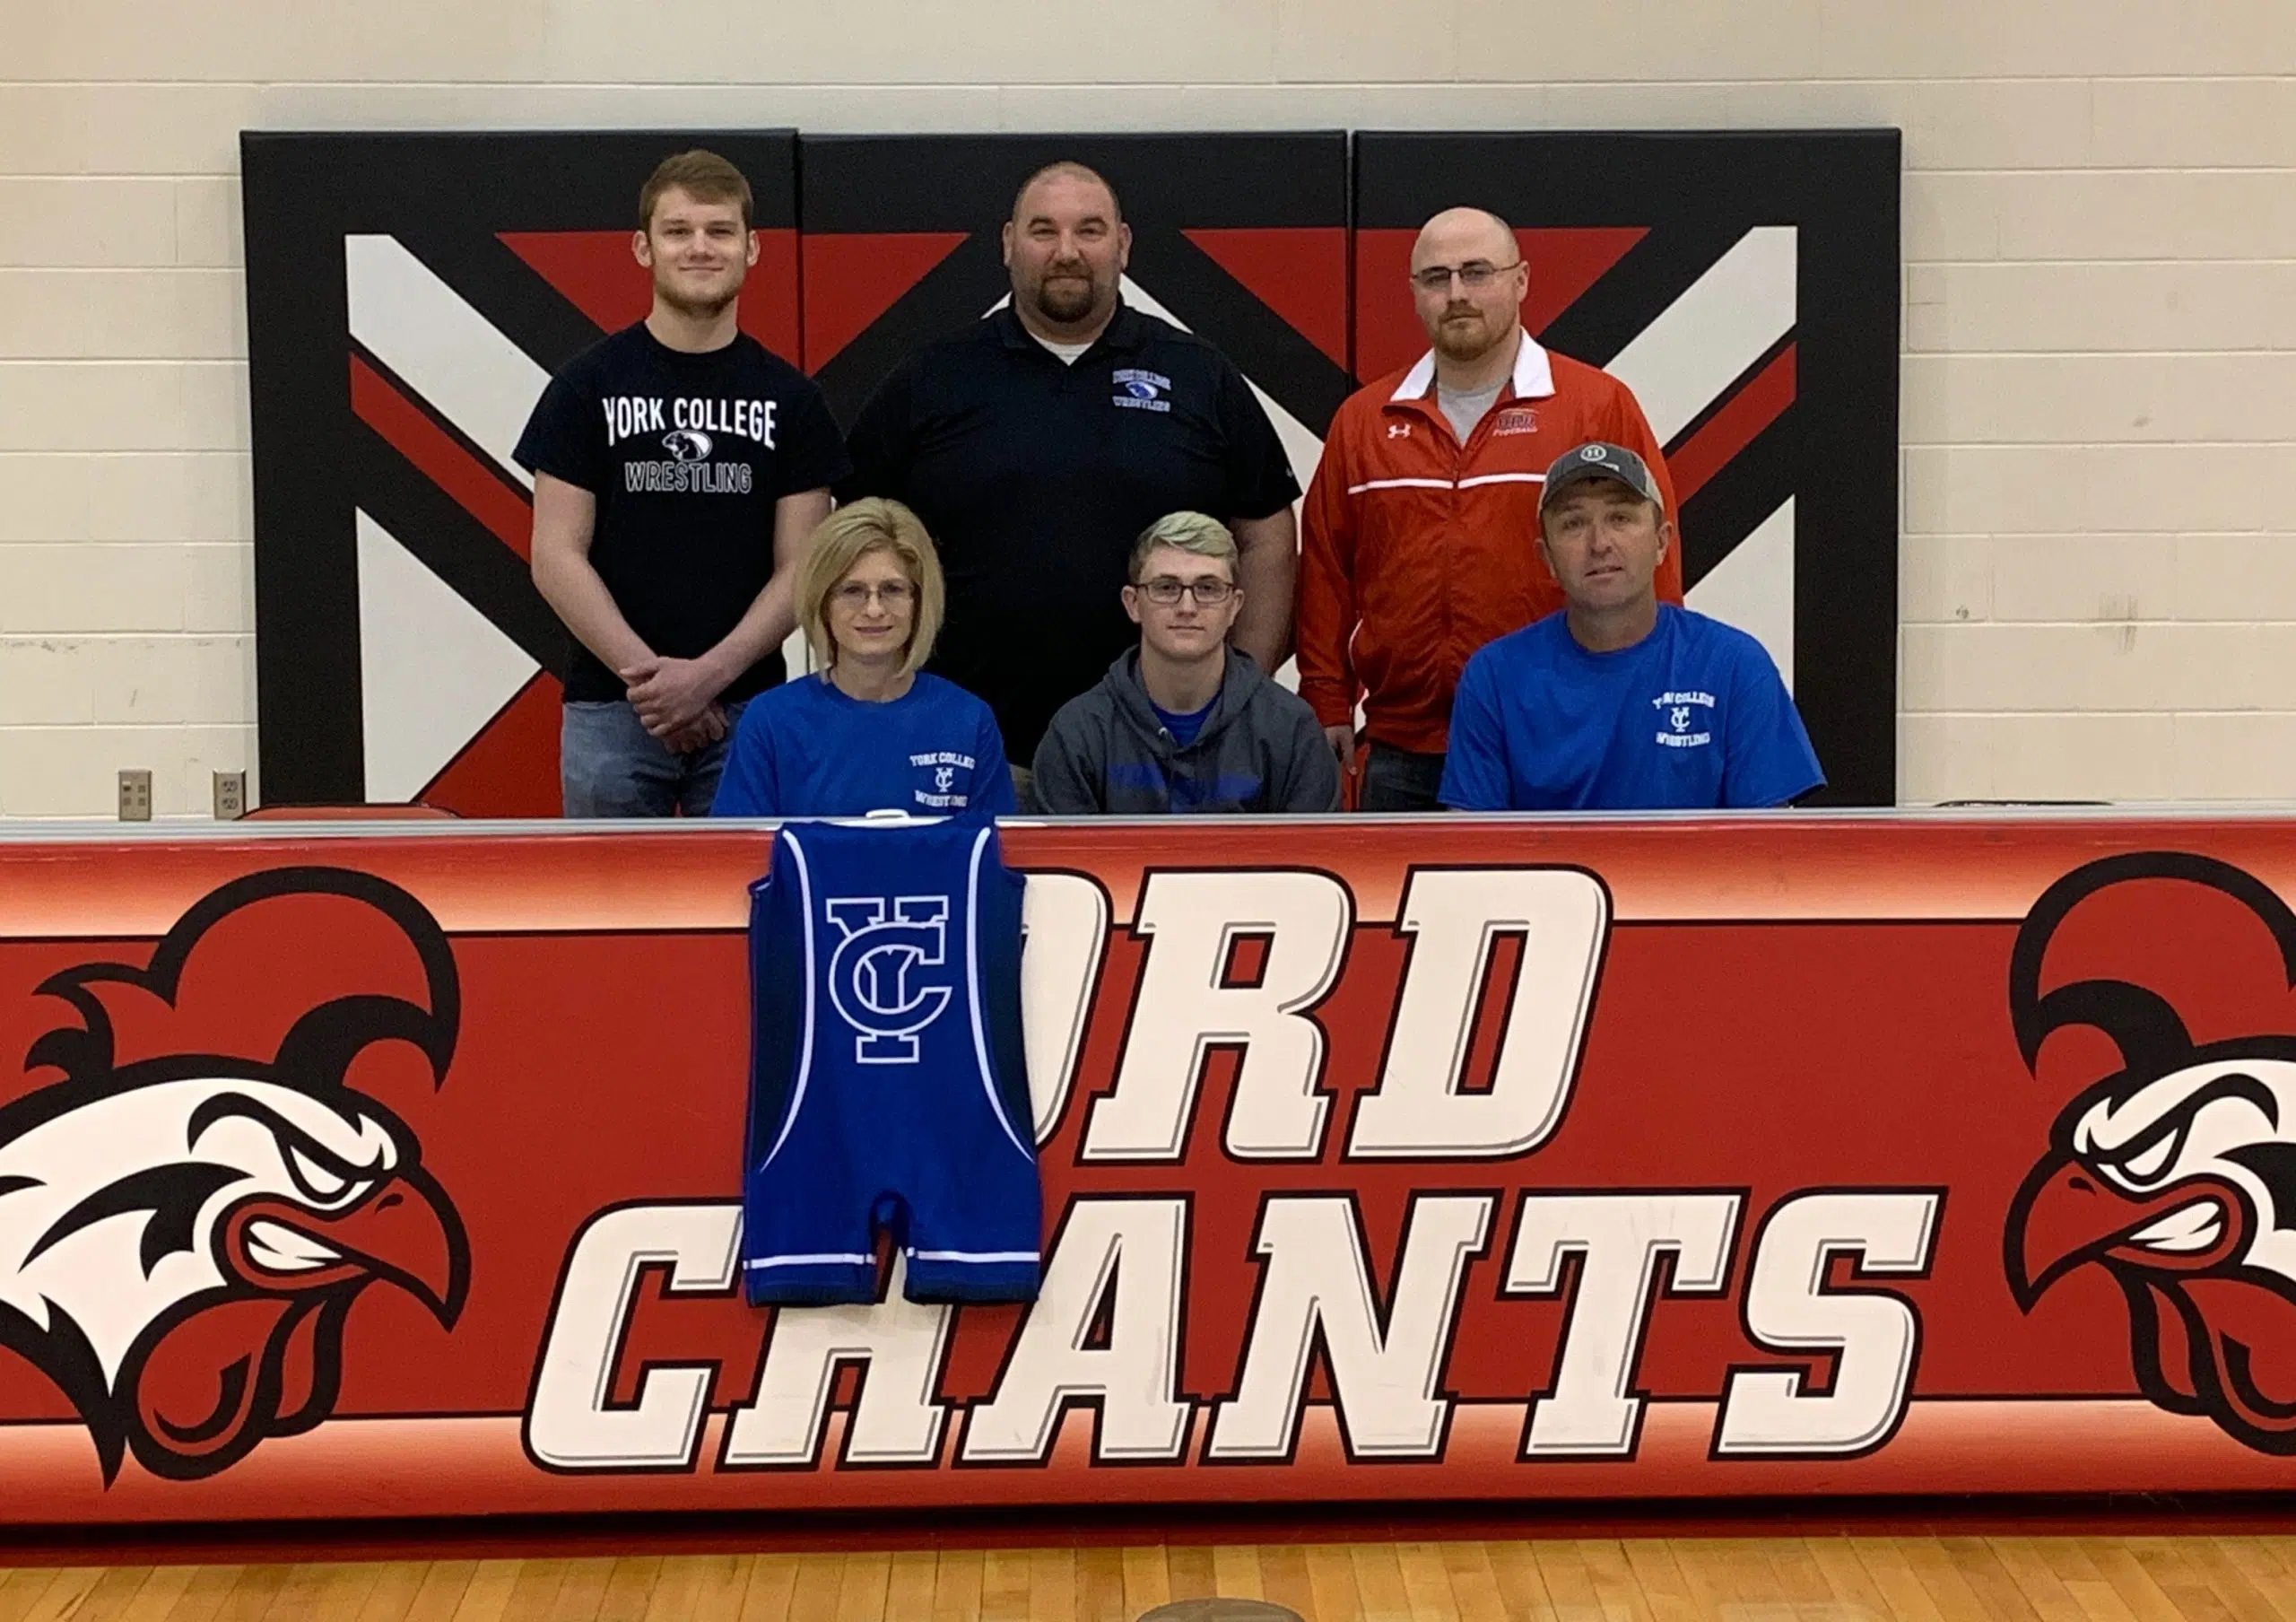 Chanticleer’s Kaden Boyce Signs on with York College for Wrestling